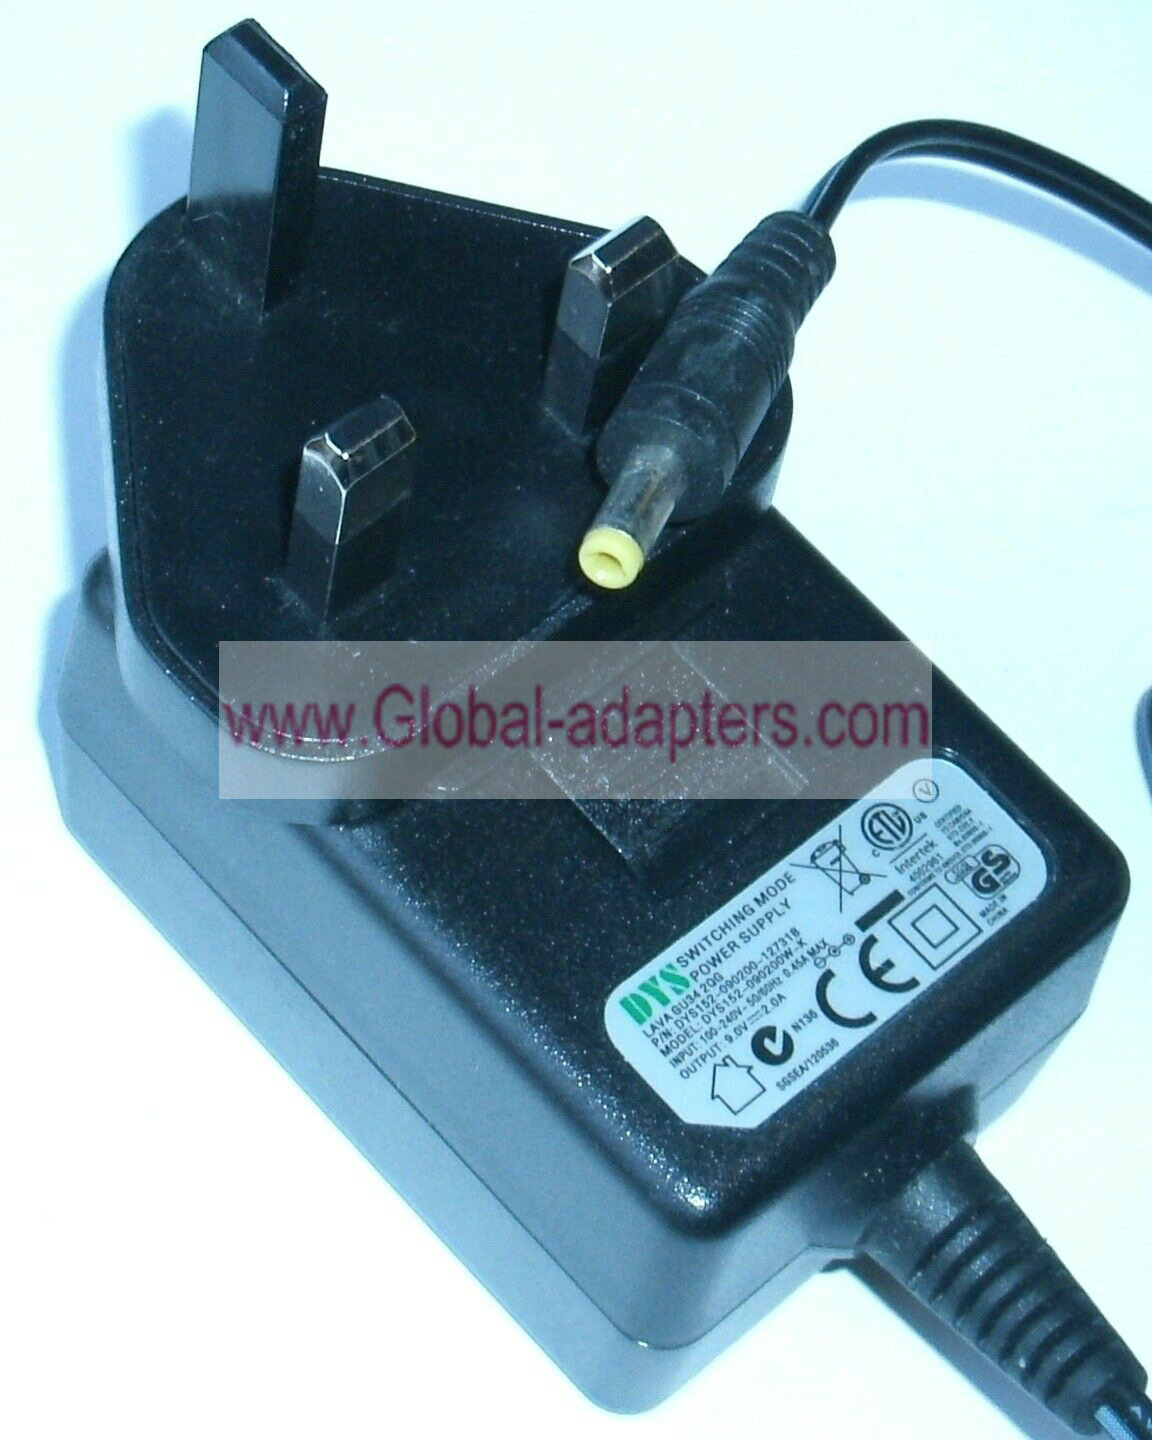 NEW DYS DYS152-090200W-K SWITCHING POWER SUPPLY 9.0V 2.0A ac adapter UK PLUG